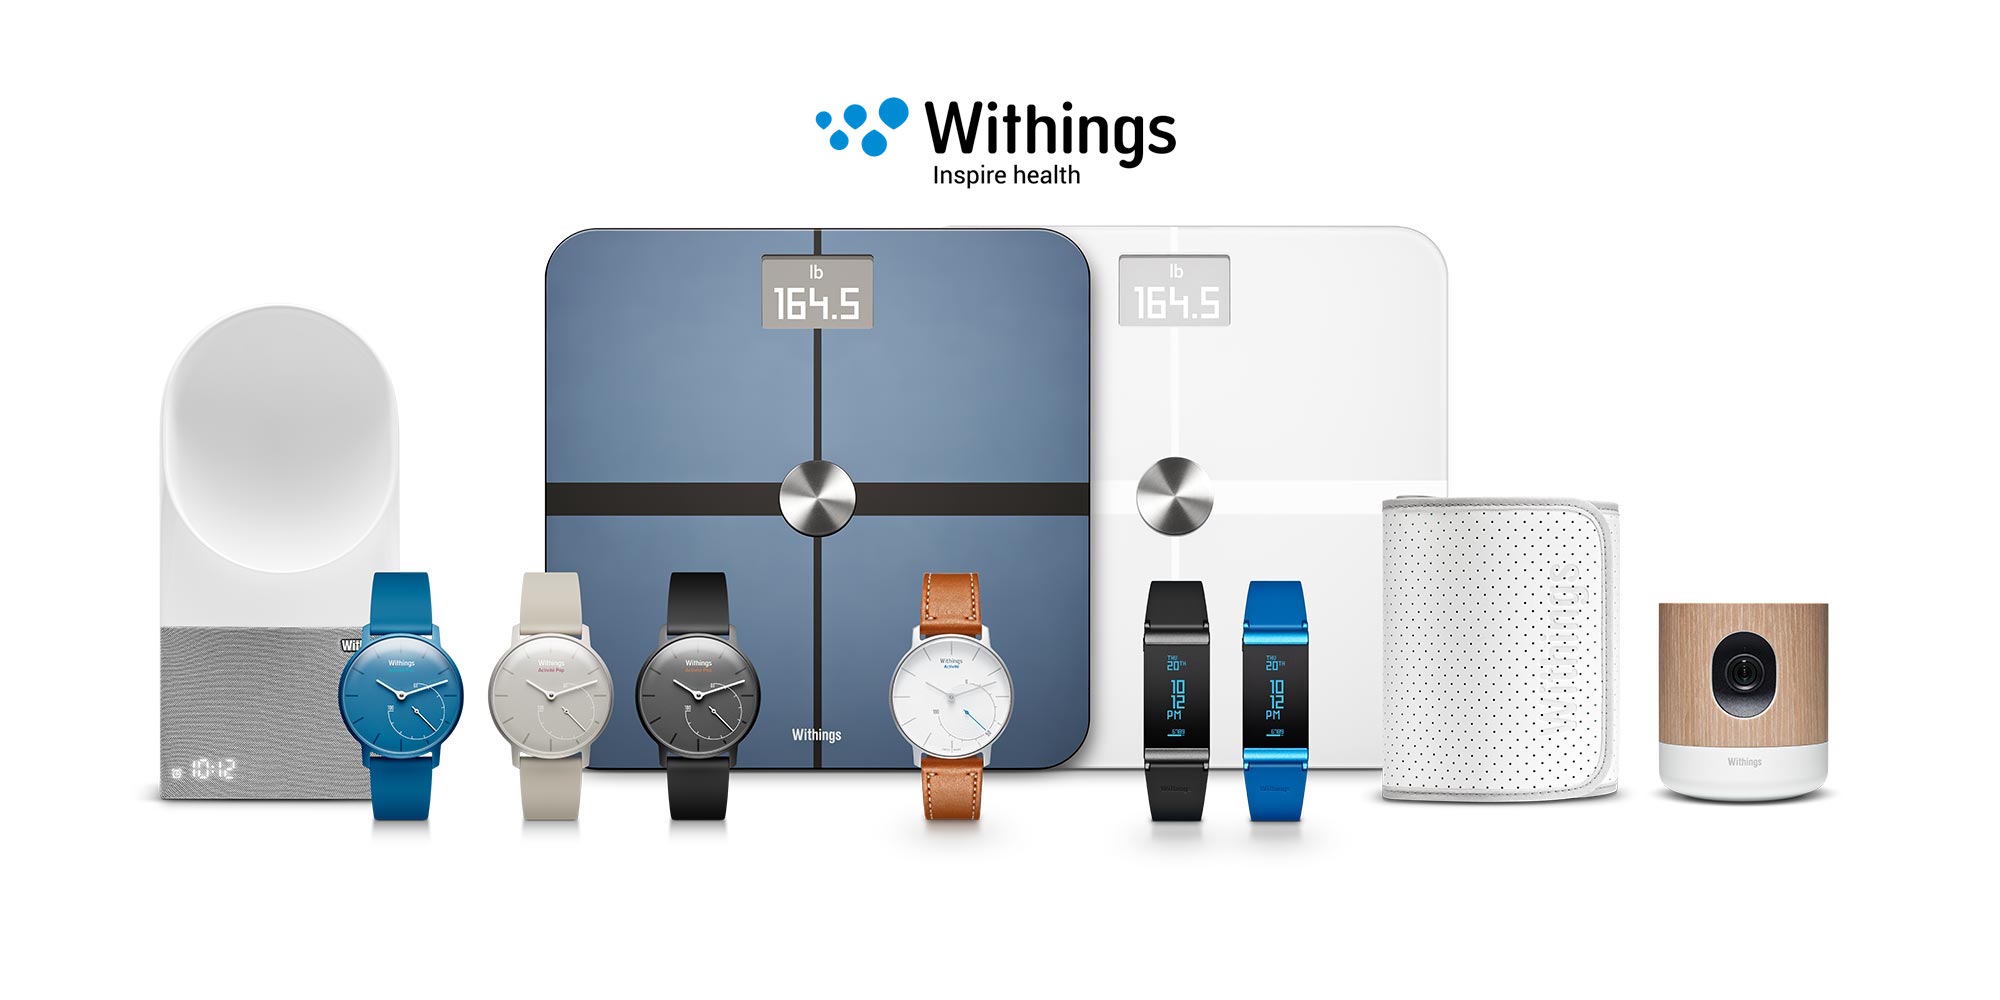 ecosysteme withings - Sante Connectee